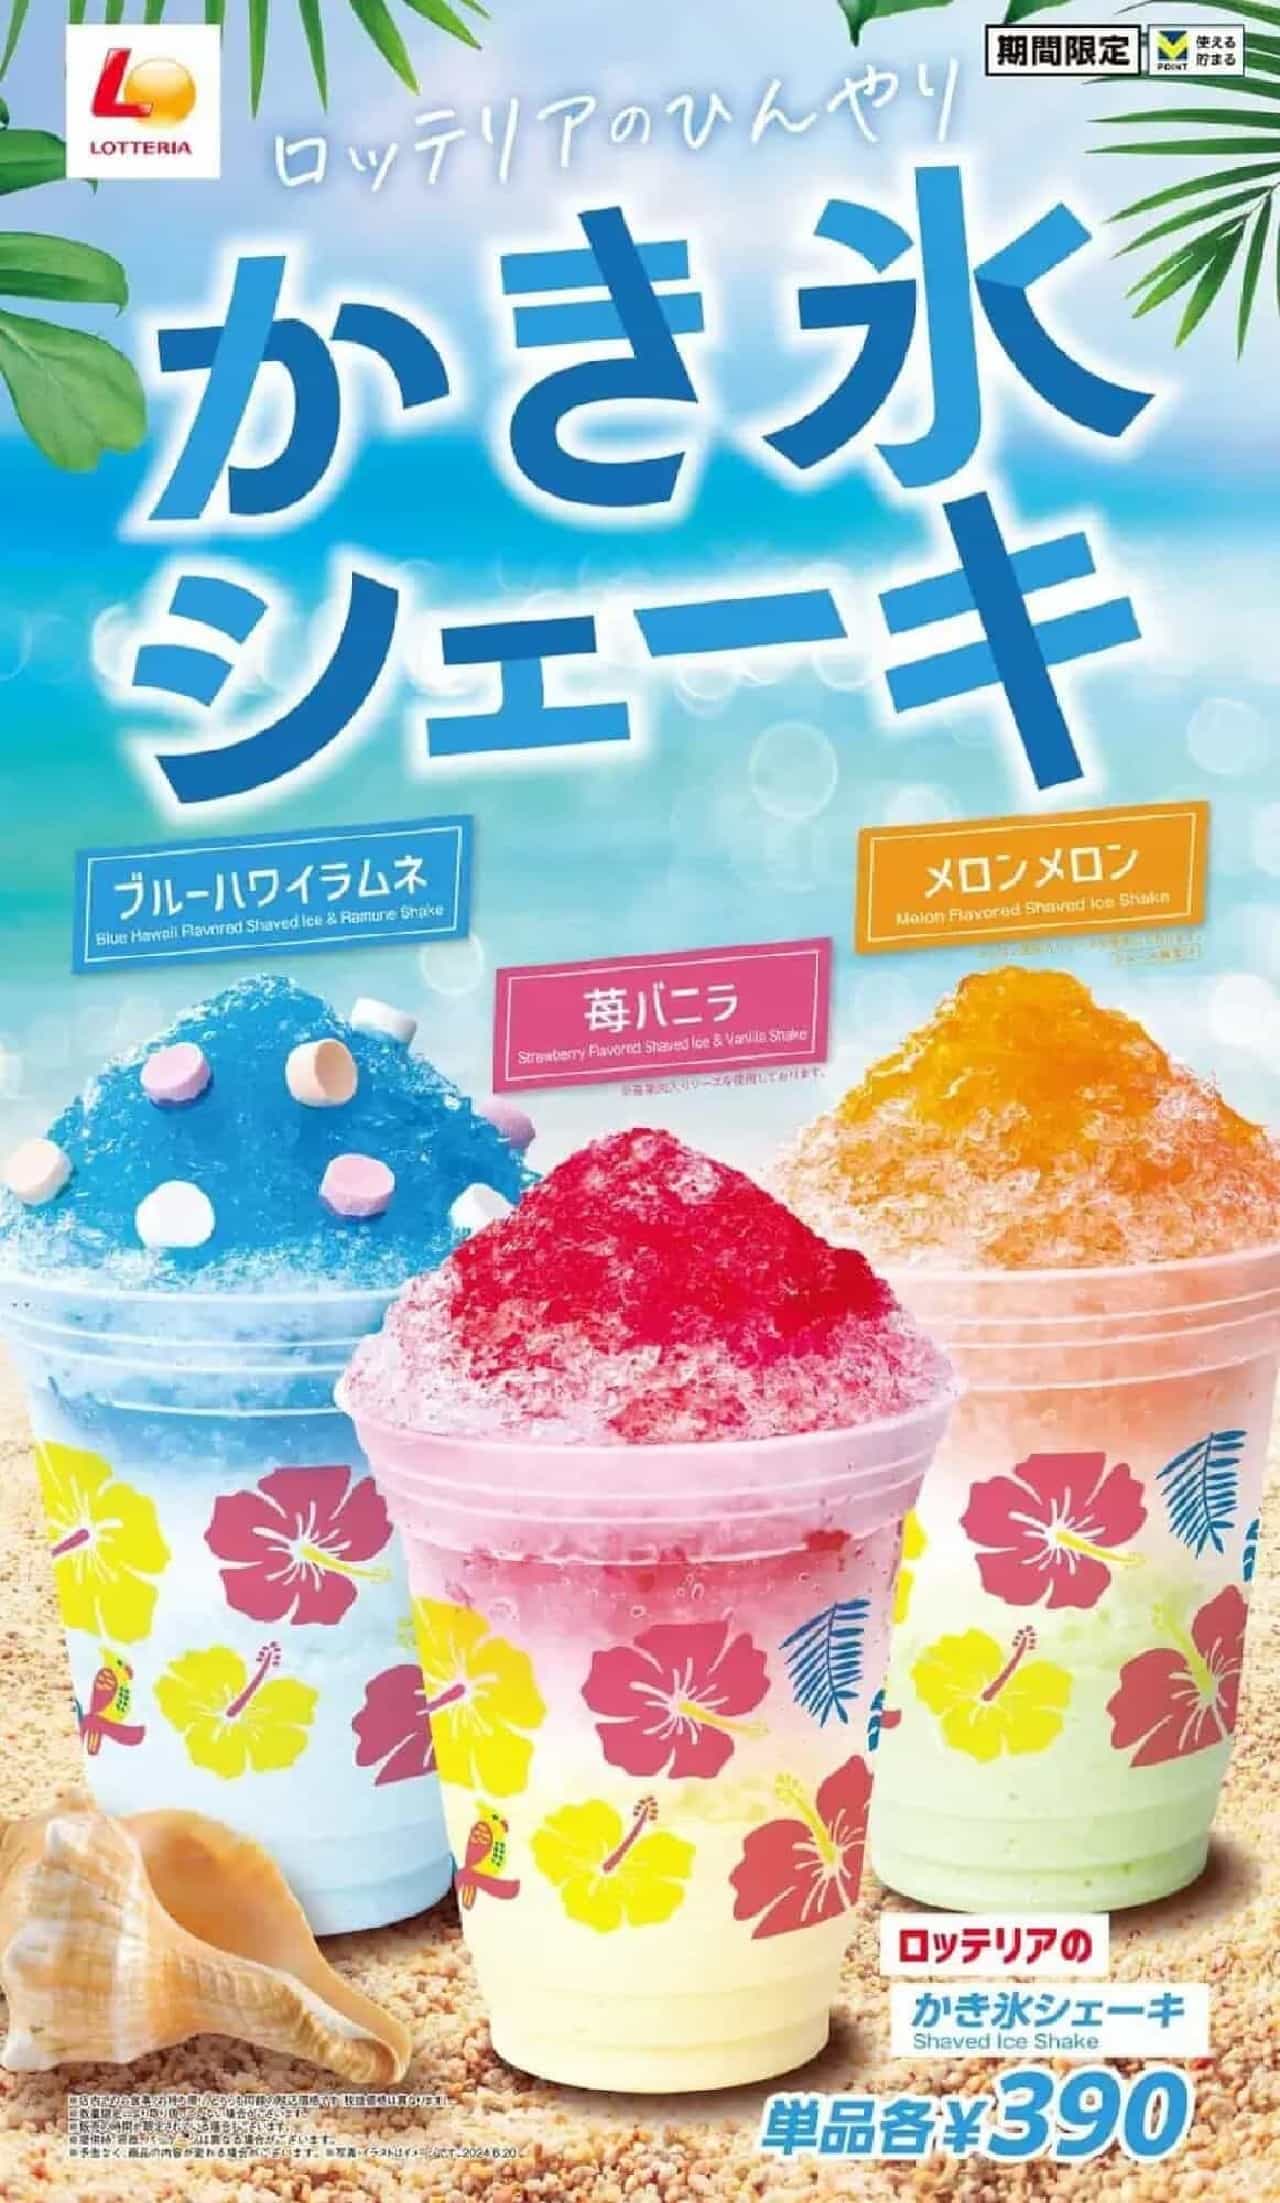 Lotteria's cool shaved ice shakes